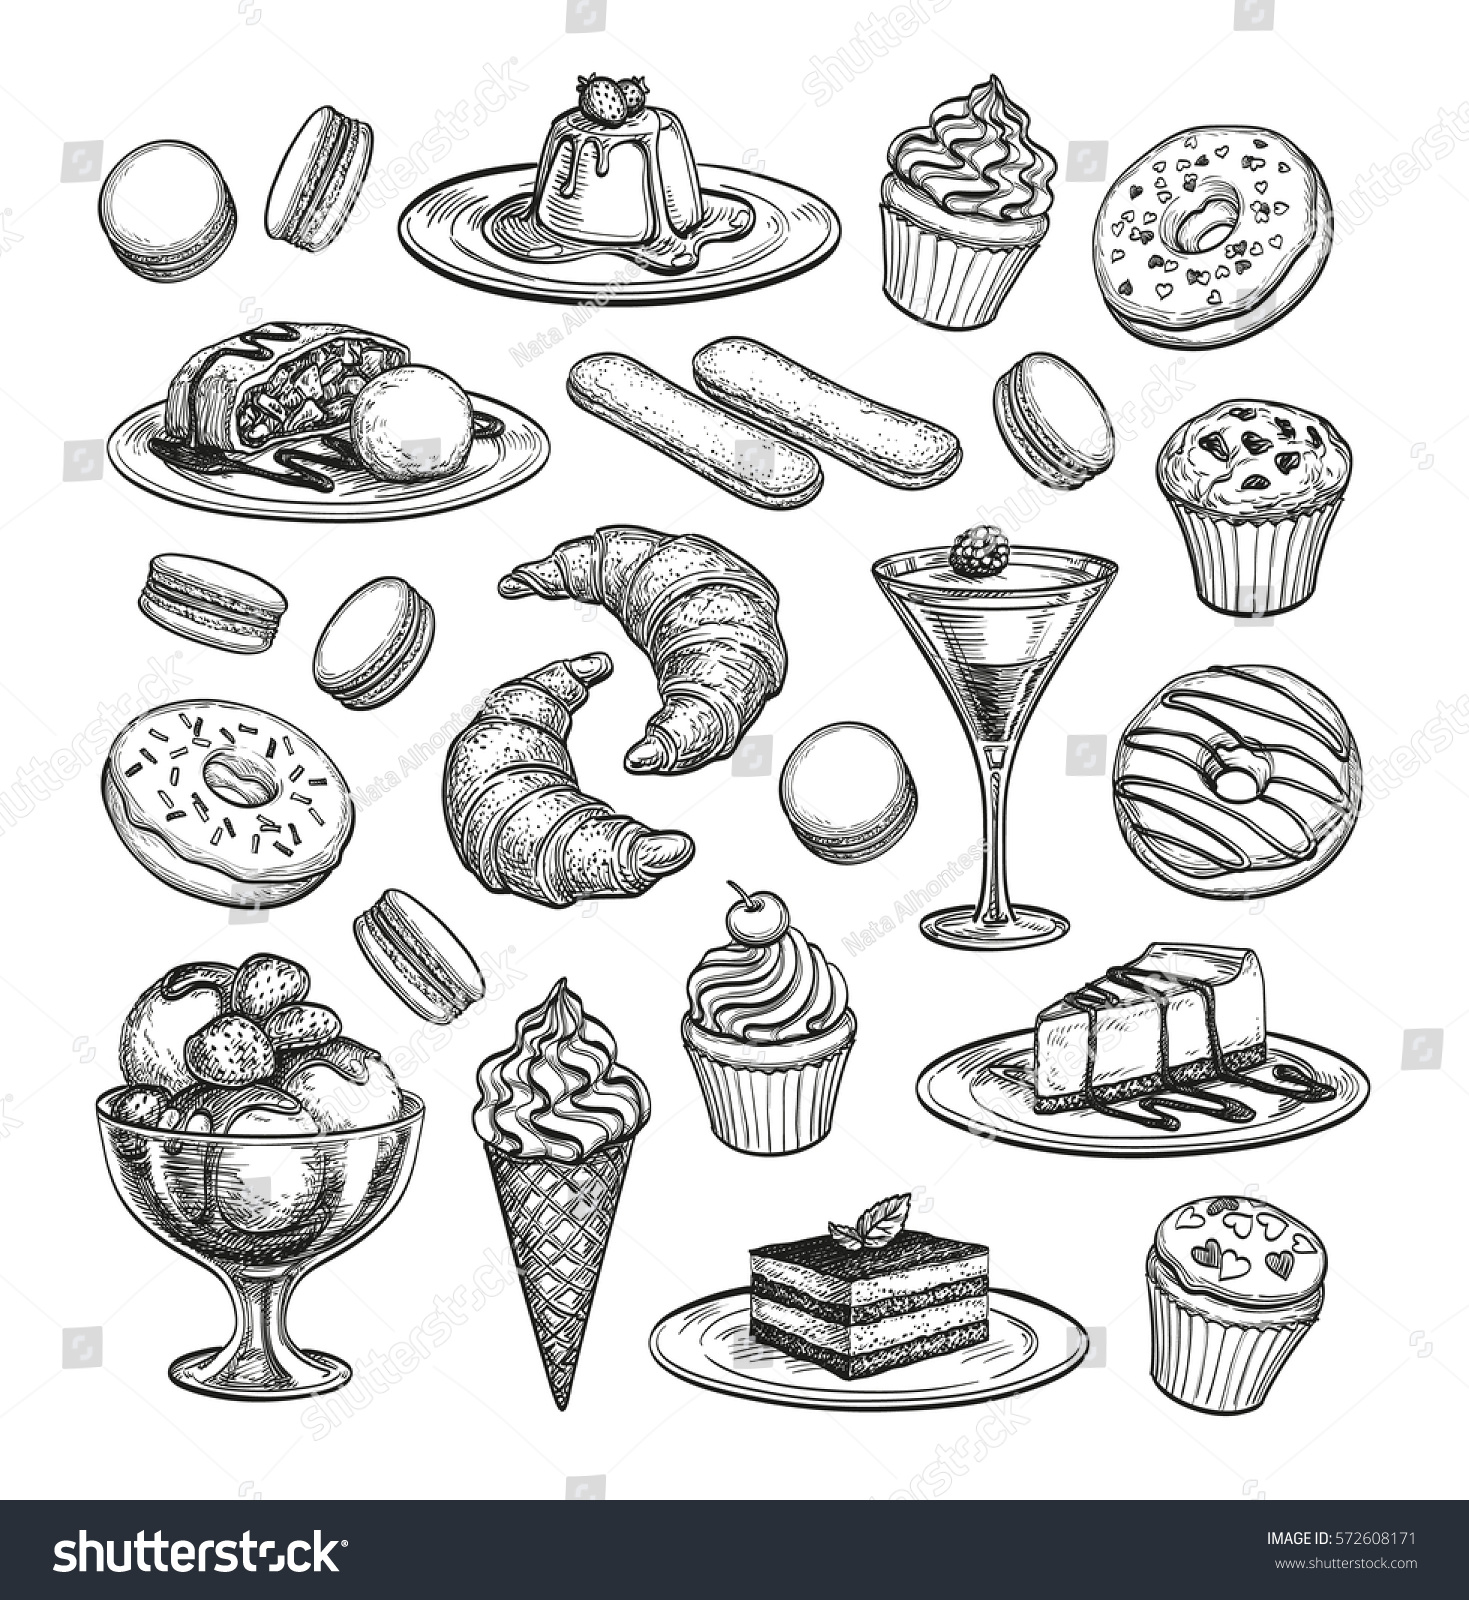 Sketch set of dessert. Pastry sweets collection isolated on white background. Hand drawn vector illustration. Retro style.